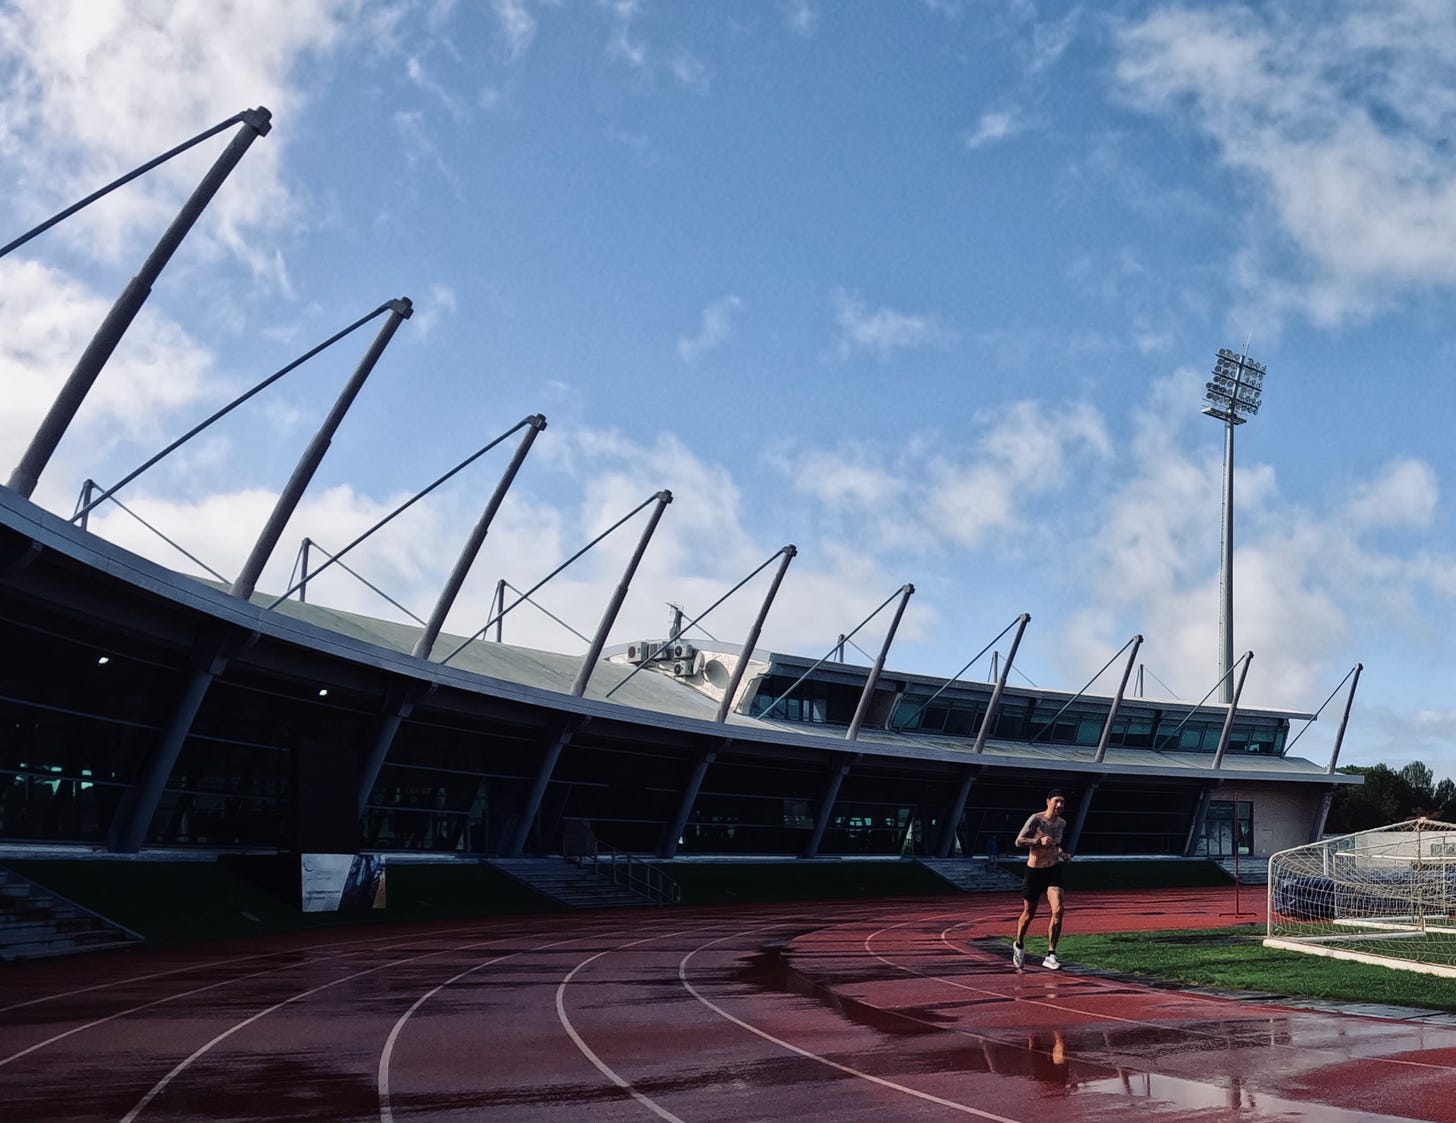 The author running on a track in a stadium